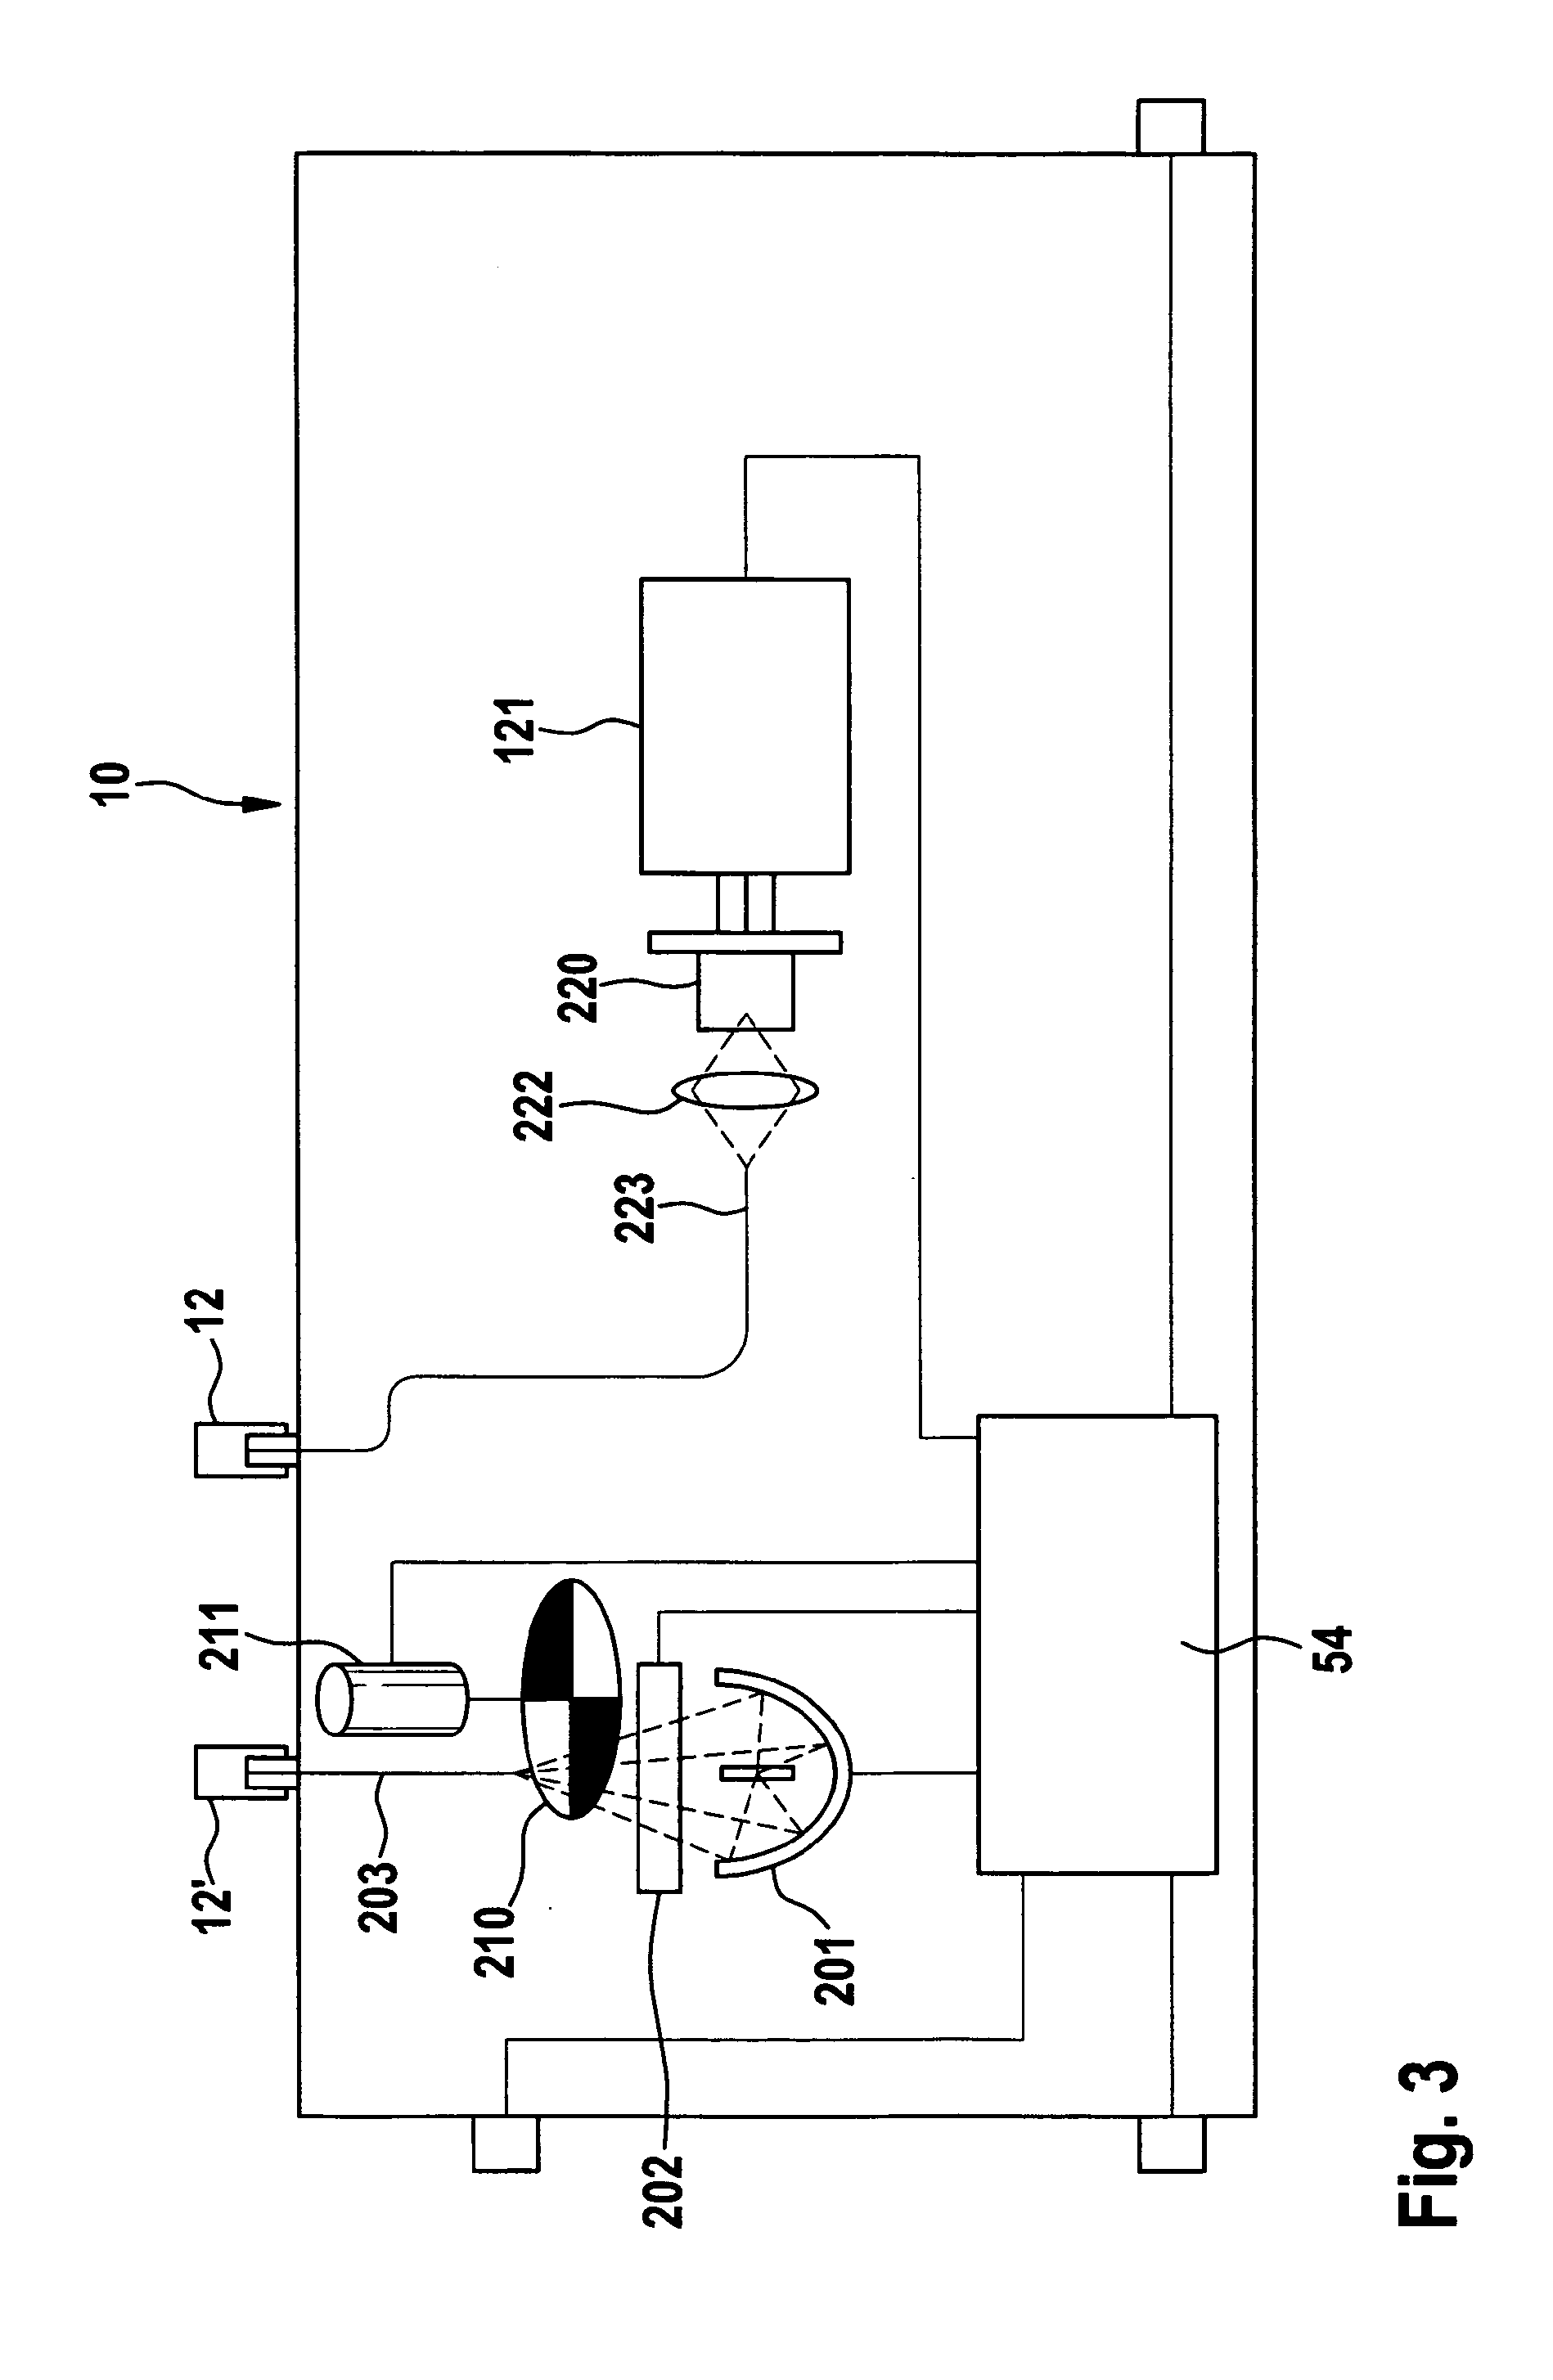 Apparatus and method for fluorescent imaging